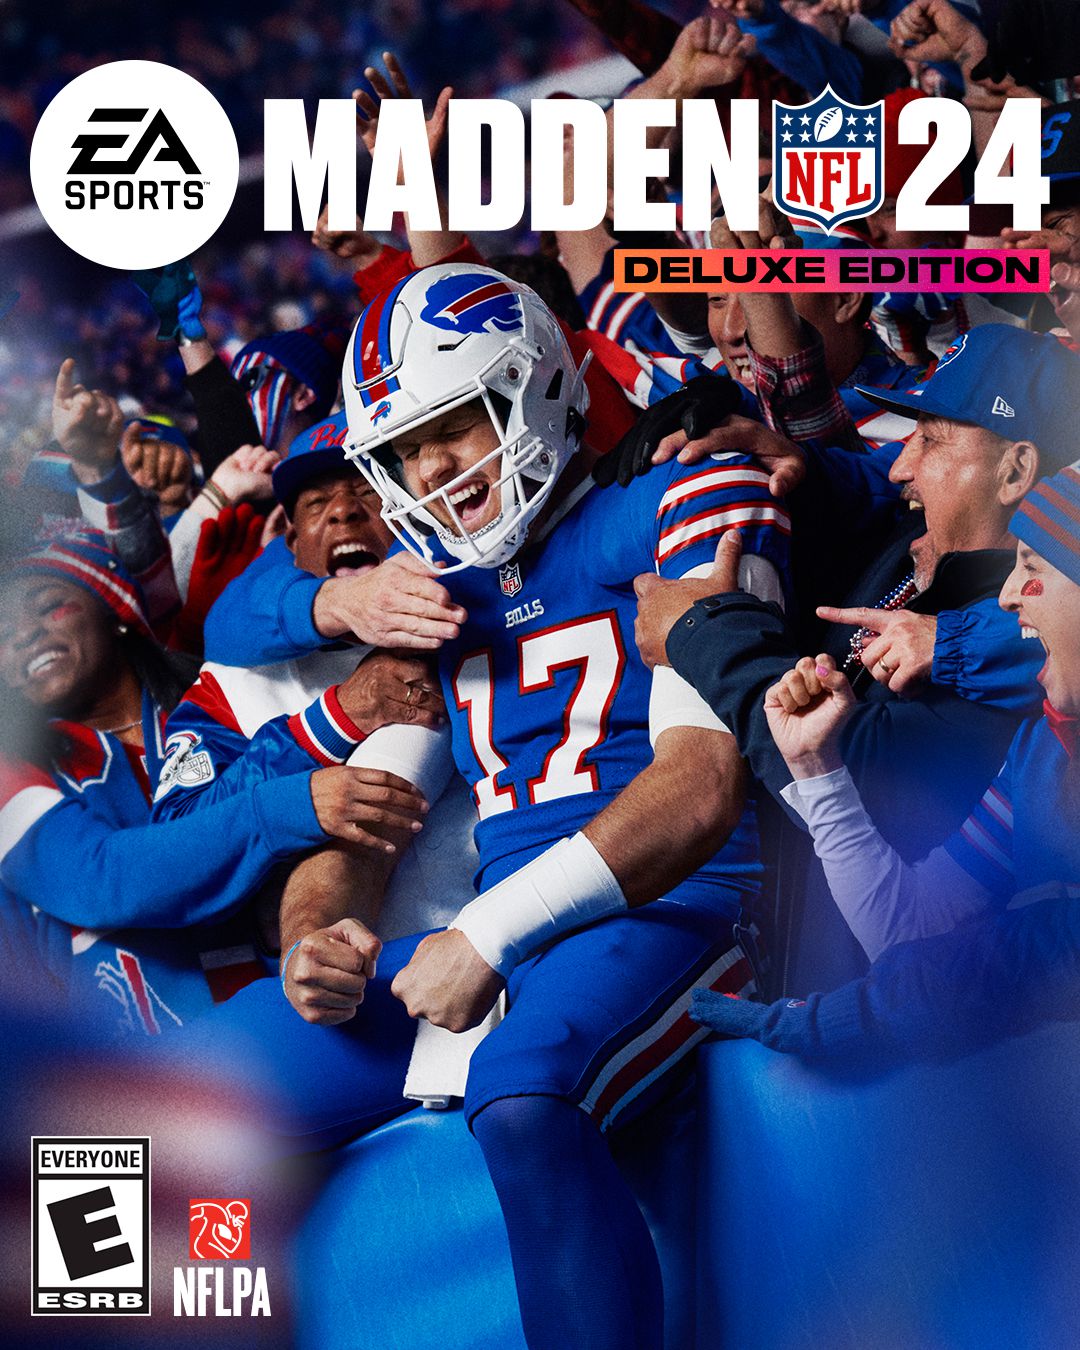 The cover of Madden NFL 24’s deluxe edition; Josh Allen of the Buffalo Bills is celebrating with fans in the stands